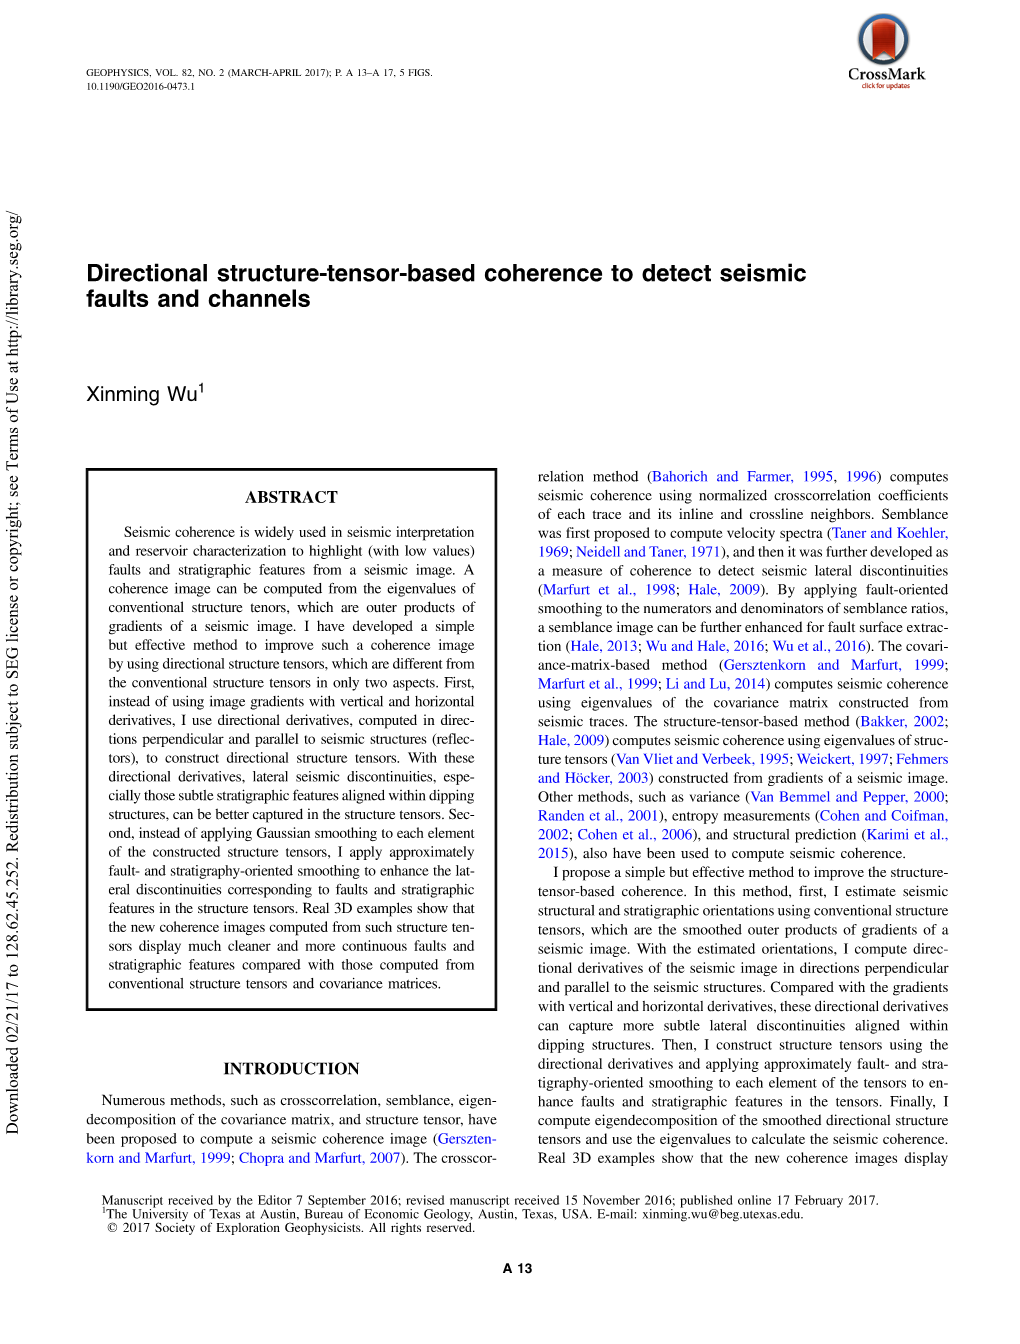 Directional Structure-Tensor-Based Coherence to Detect Seismic Faults and Channels